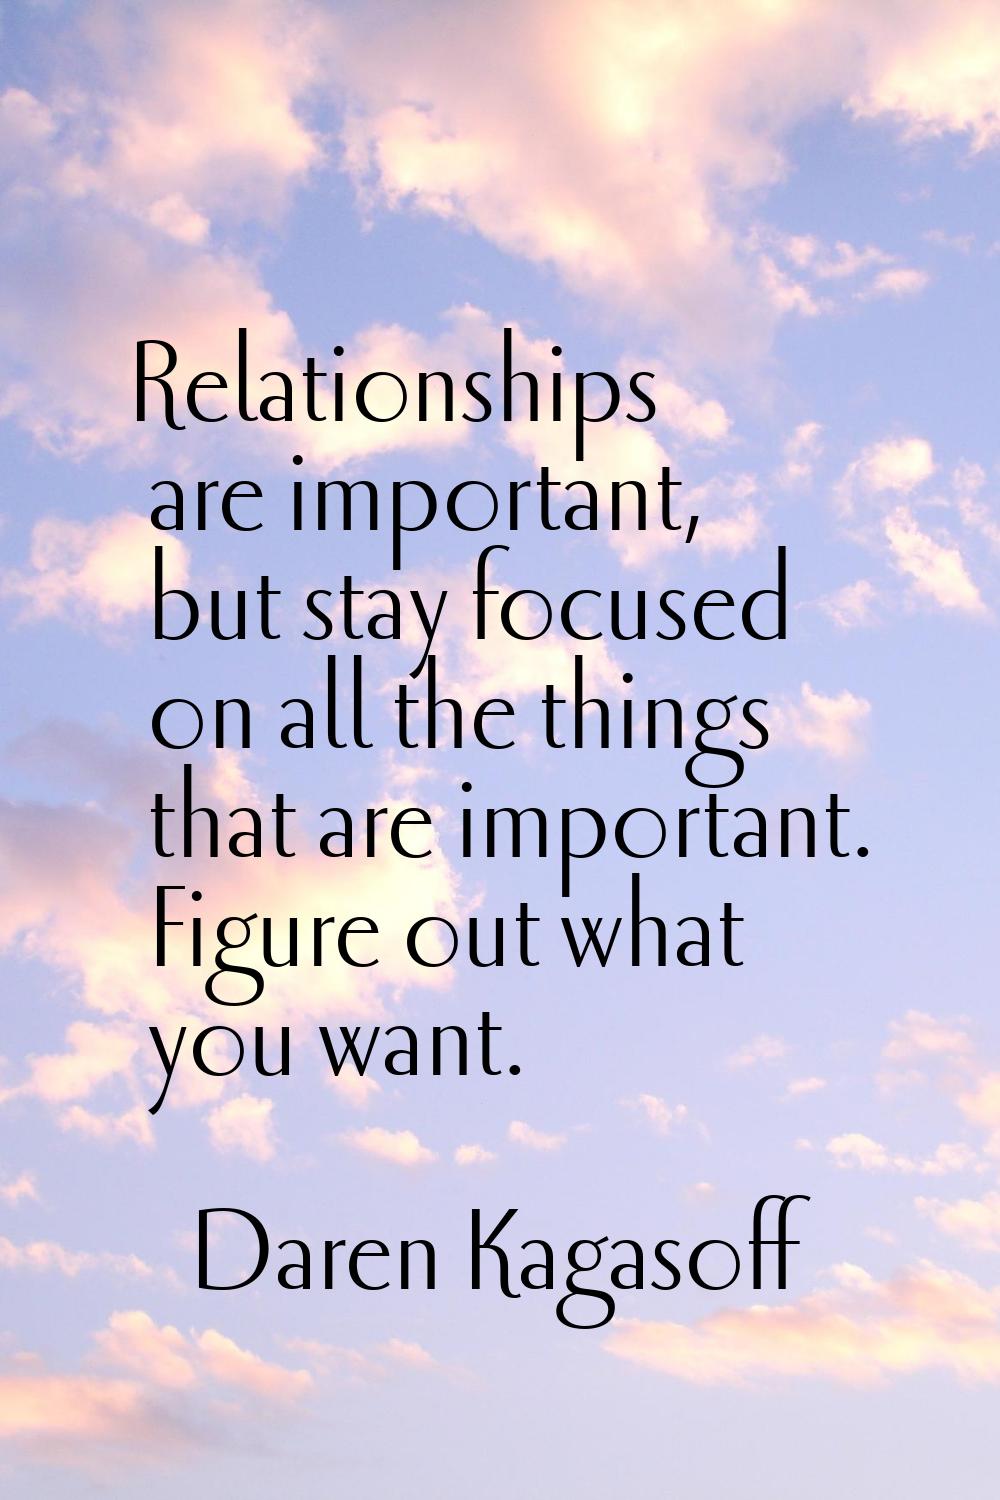 Relationships are important, but stay focused on all the things that are important. Figure out what